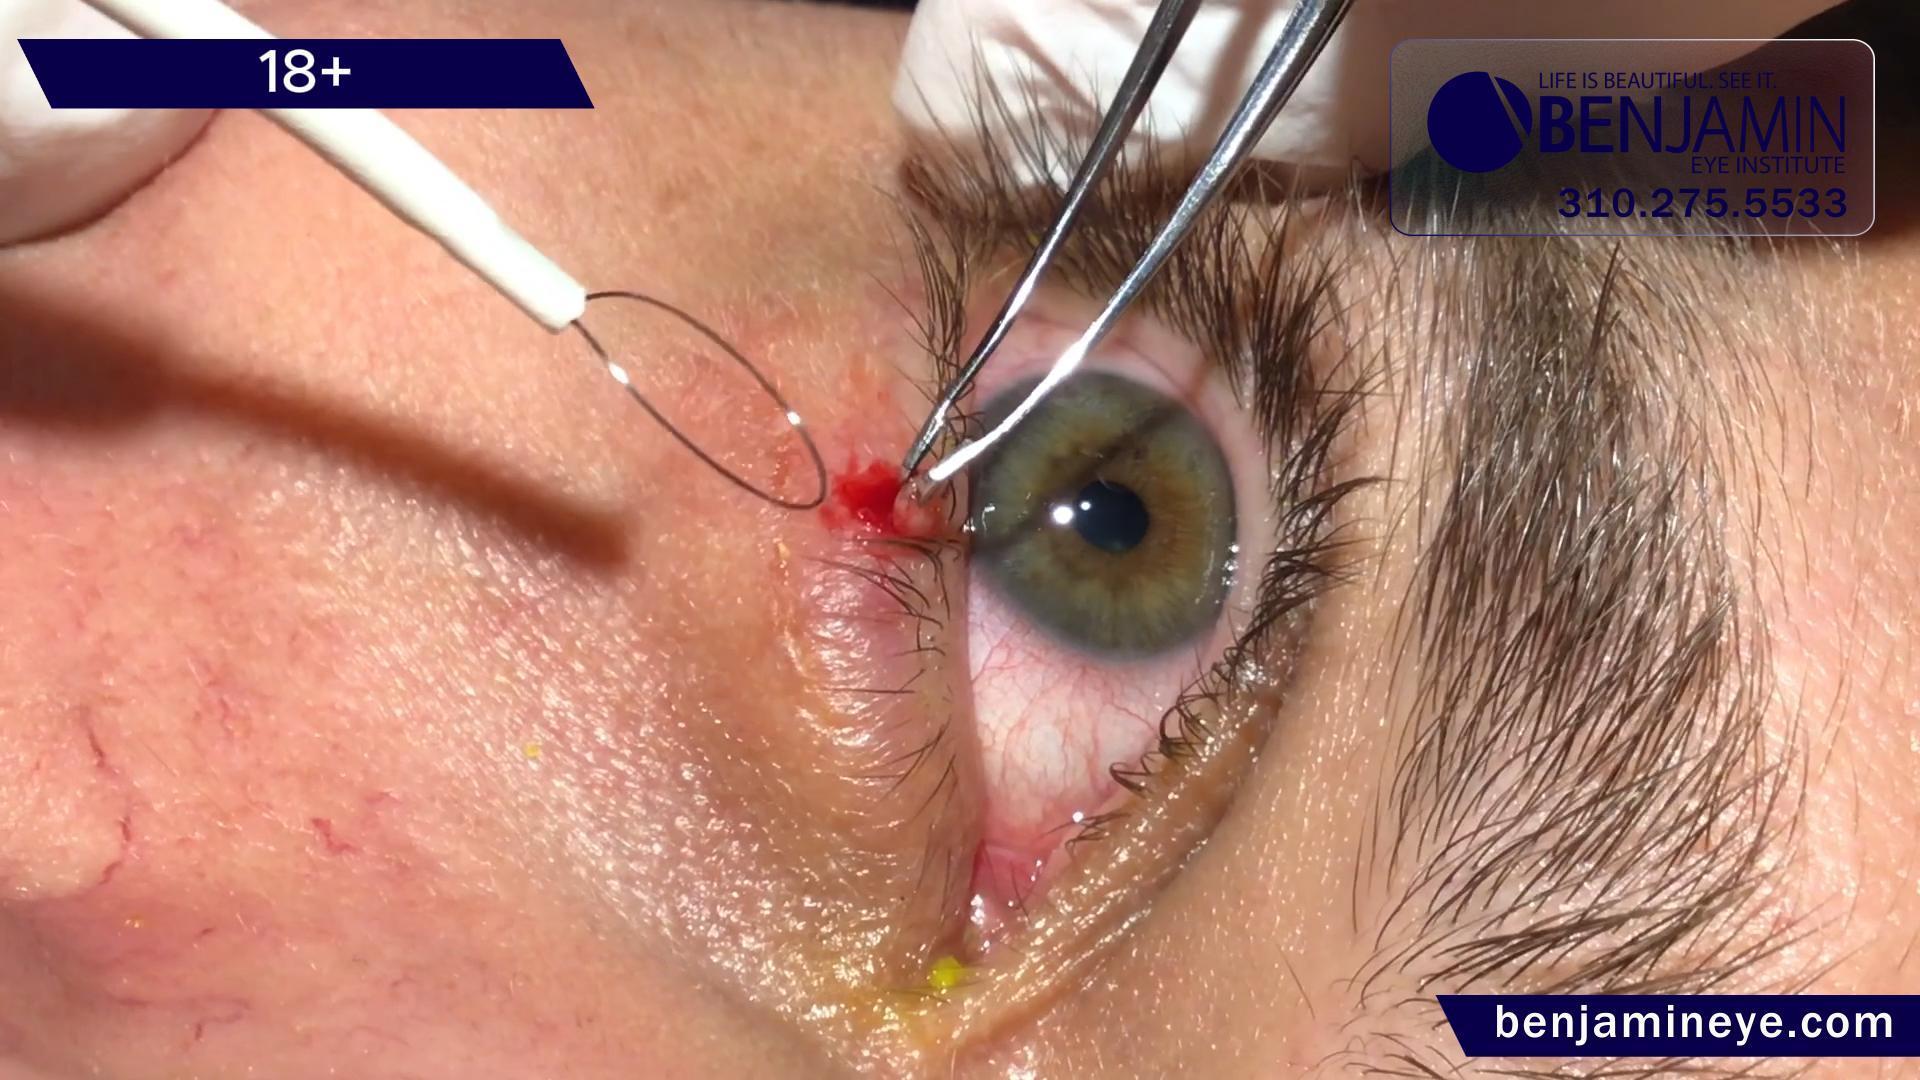 Masterful Precision: Dr. Benjamin's Approach to Cystic Eyelid Lesion Removal